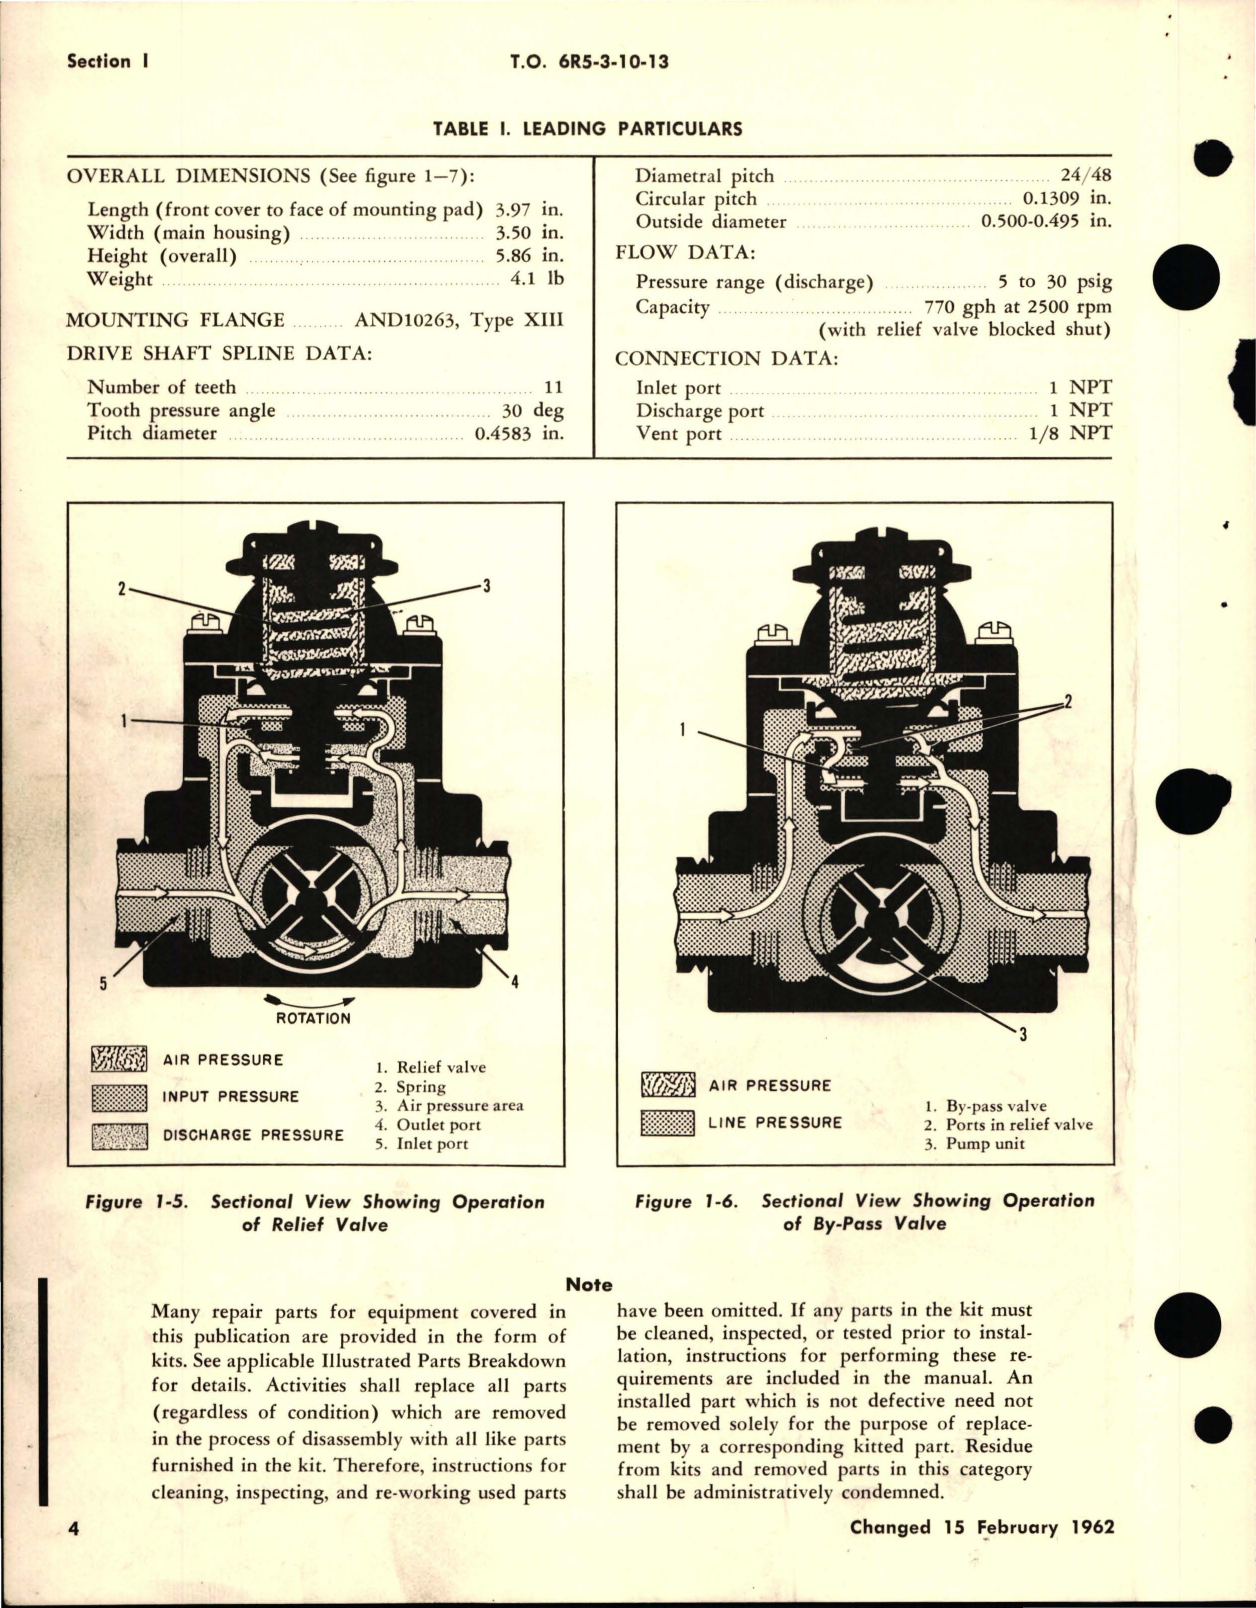 Sample page 8 from AirCorps Library document: Overhaul Instructions for Fuel and Water Pumps - Types A-1, A-2, F-10, G-6, G-9, and G-10